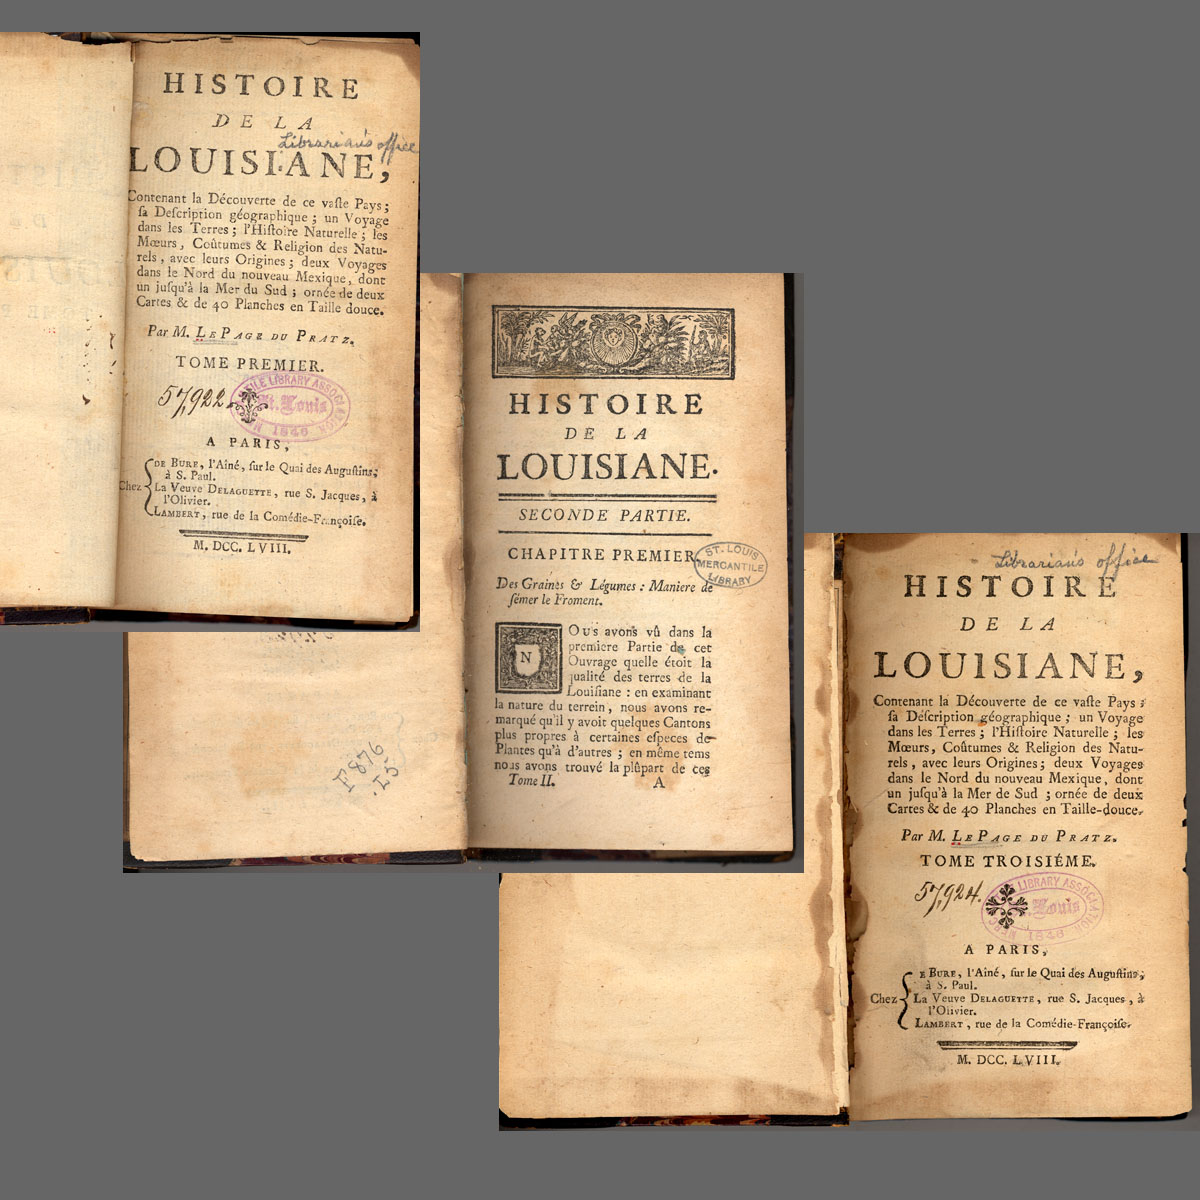 History of Louisiana, in three volumes by Antoine Le Page du Pratz, published in 1758